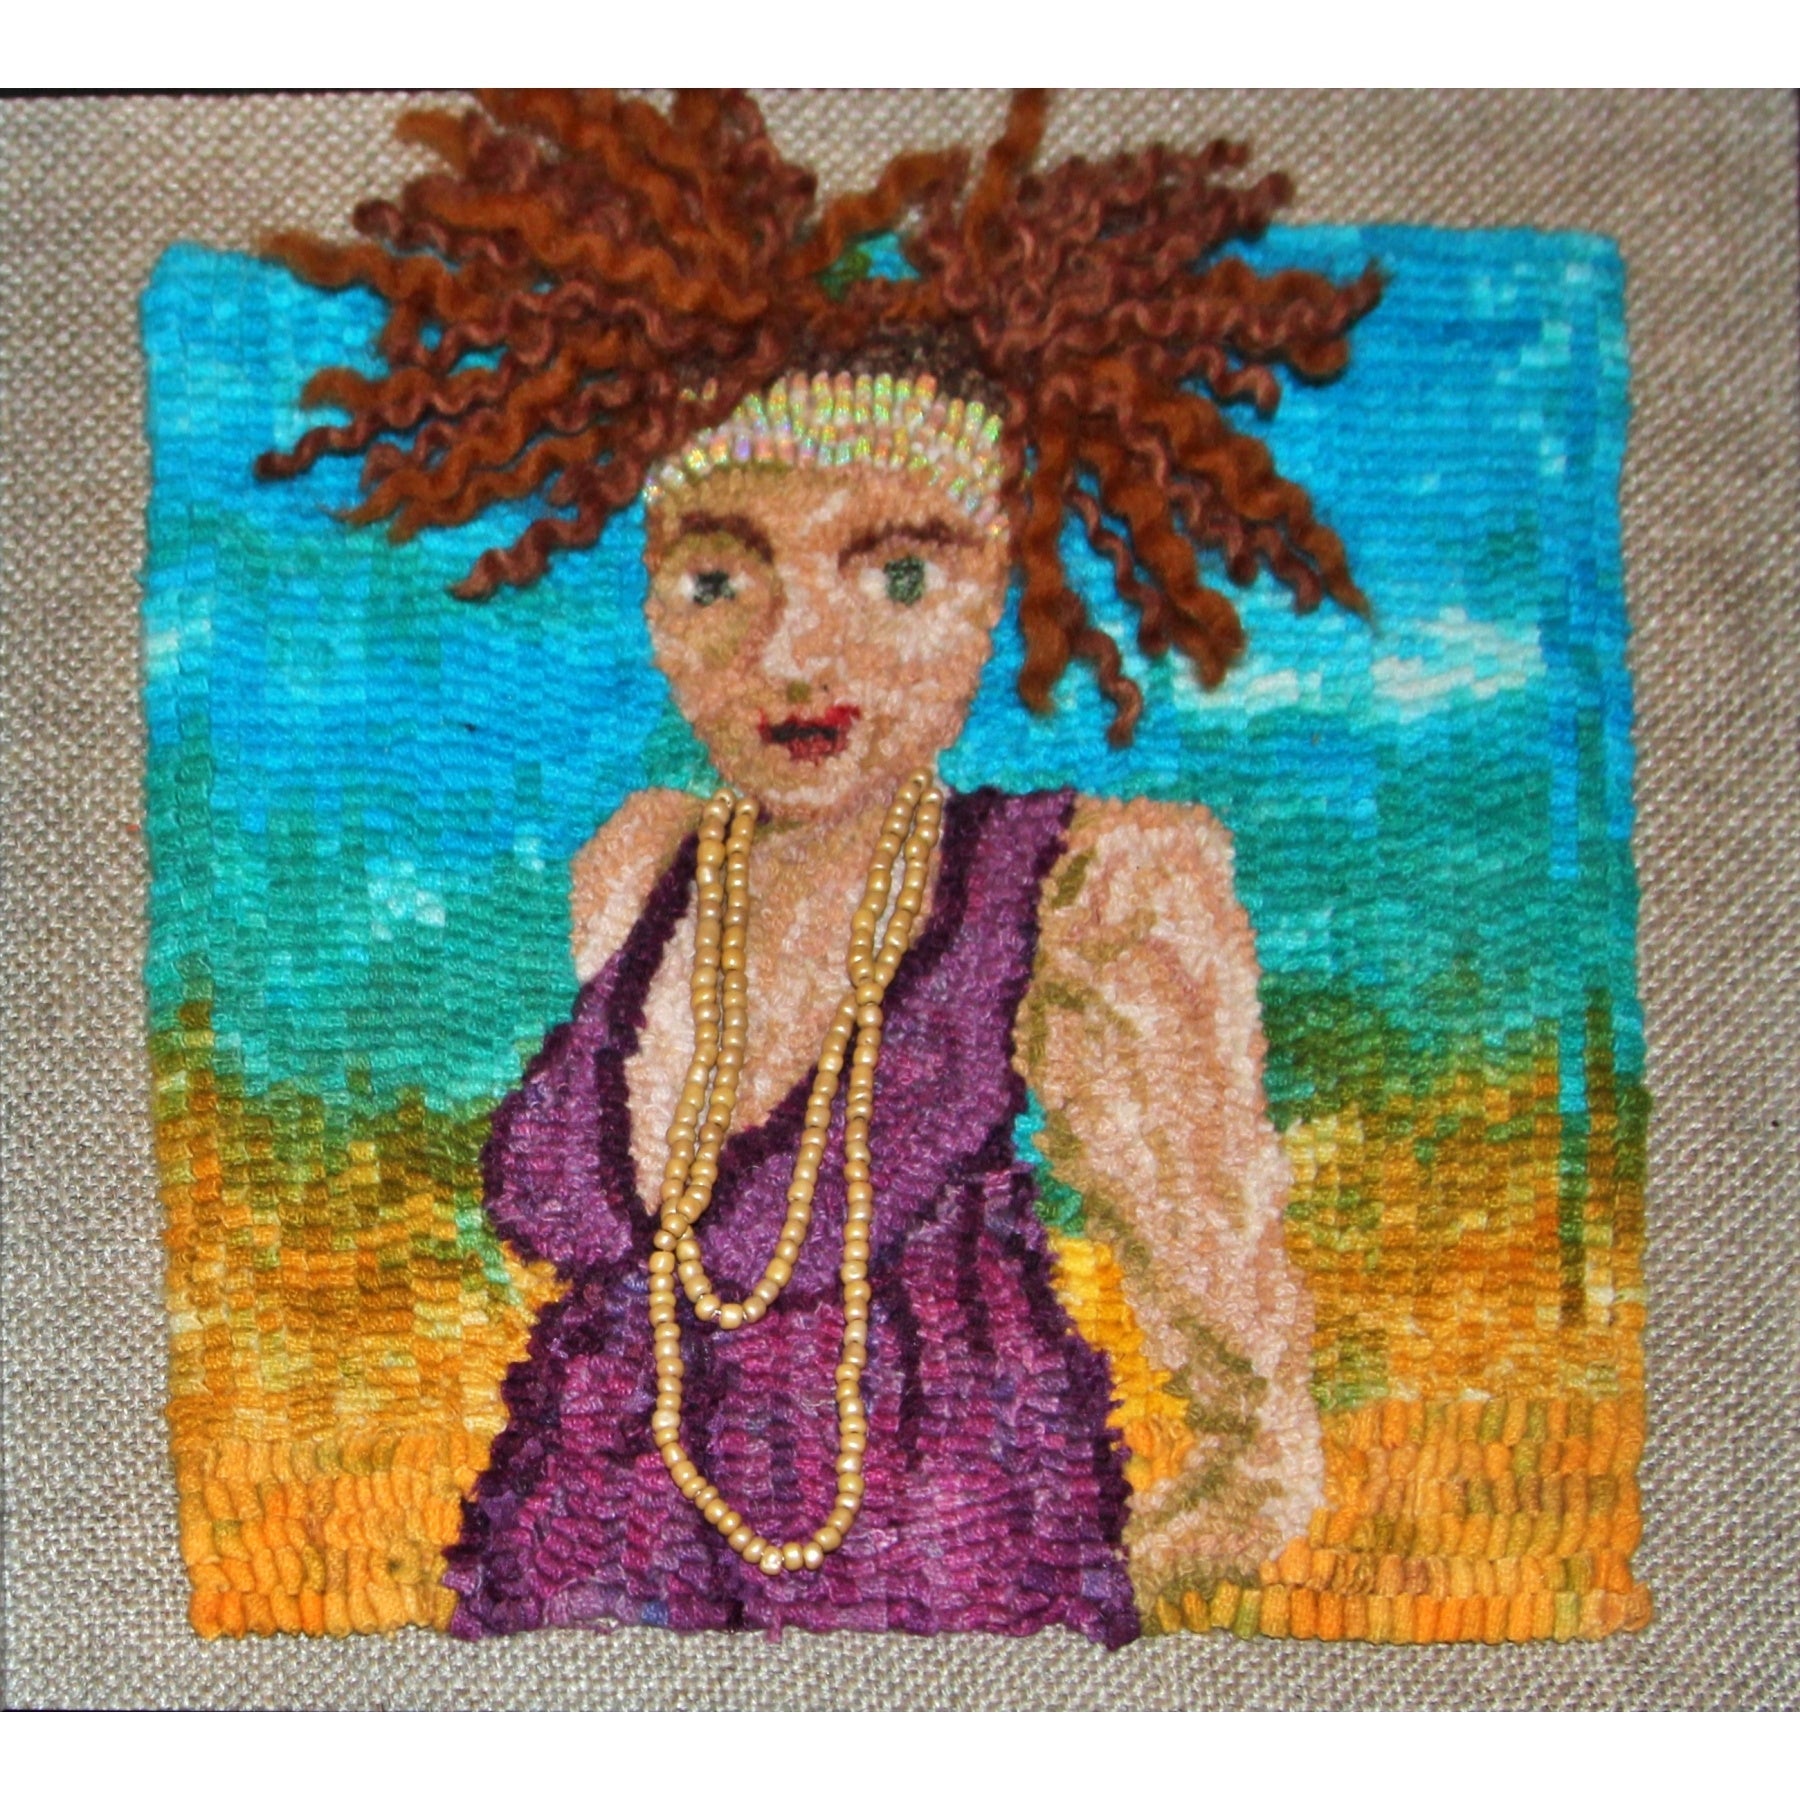 What's She Selling?, rug hooked by Melissa Pattacini